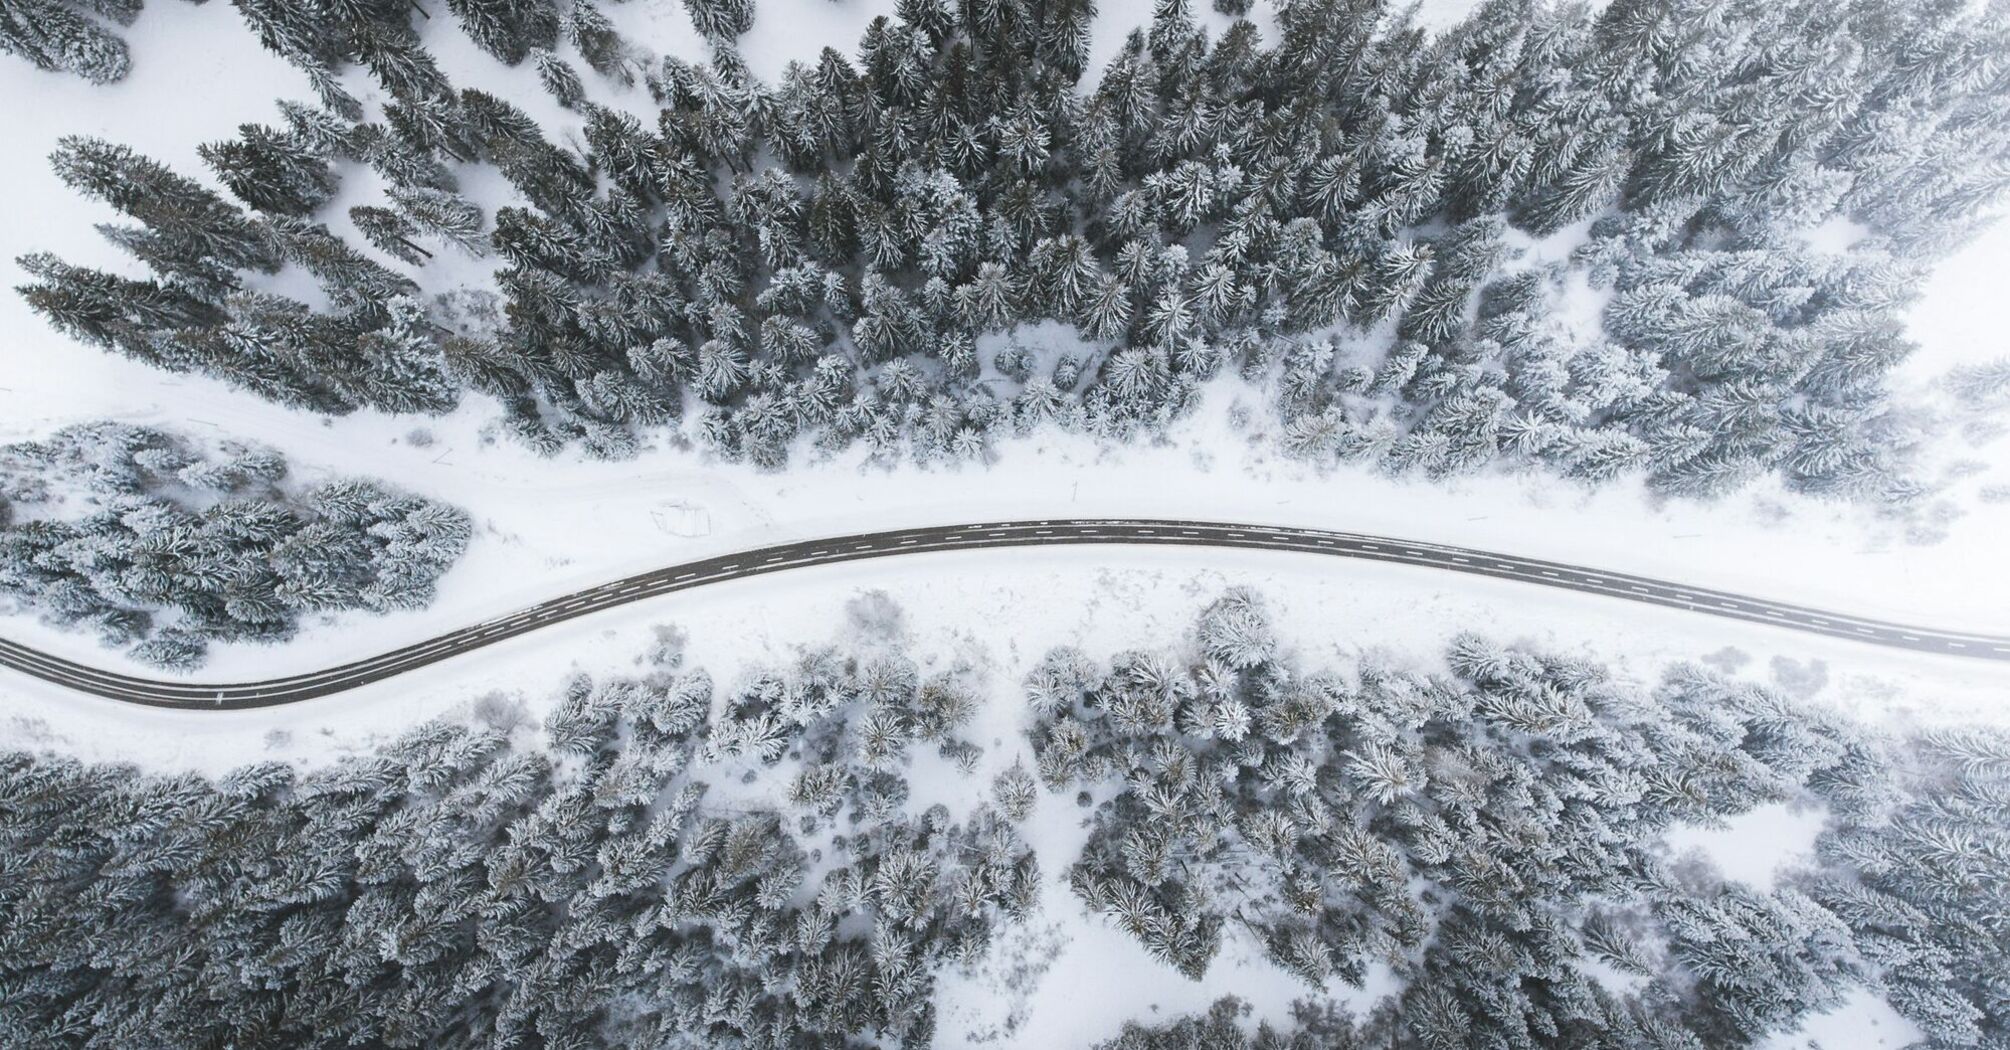 Aerial view of a winding road cutting through a dense snow-covered forest